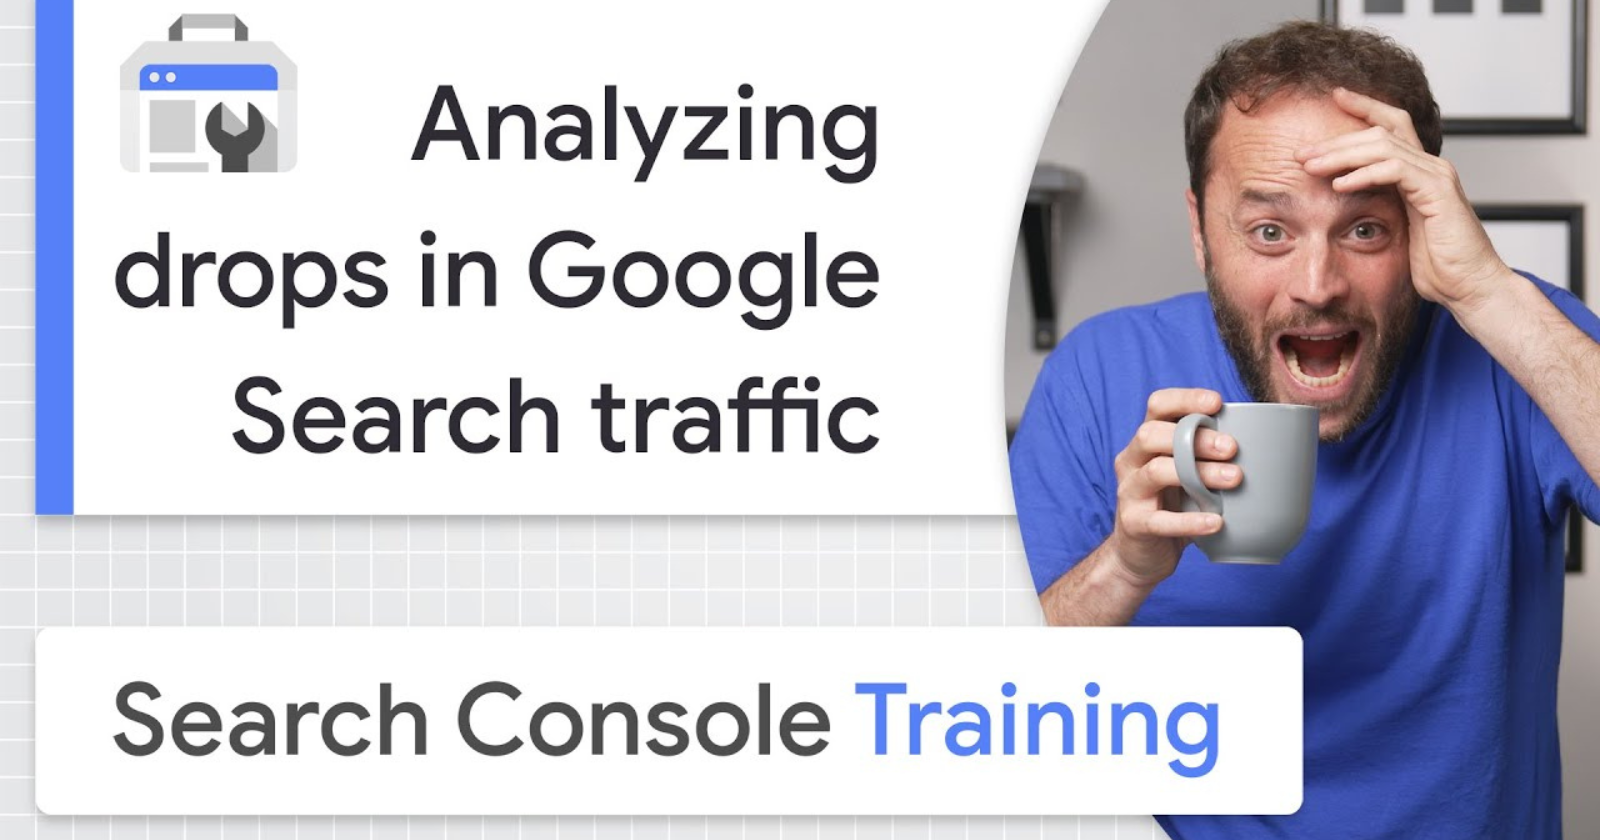 Google Search Console Tutorial: Analyzing Traffic Drops